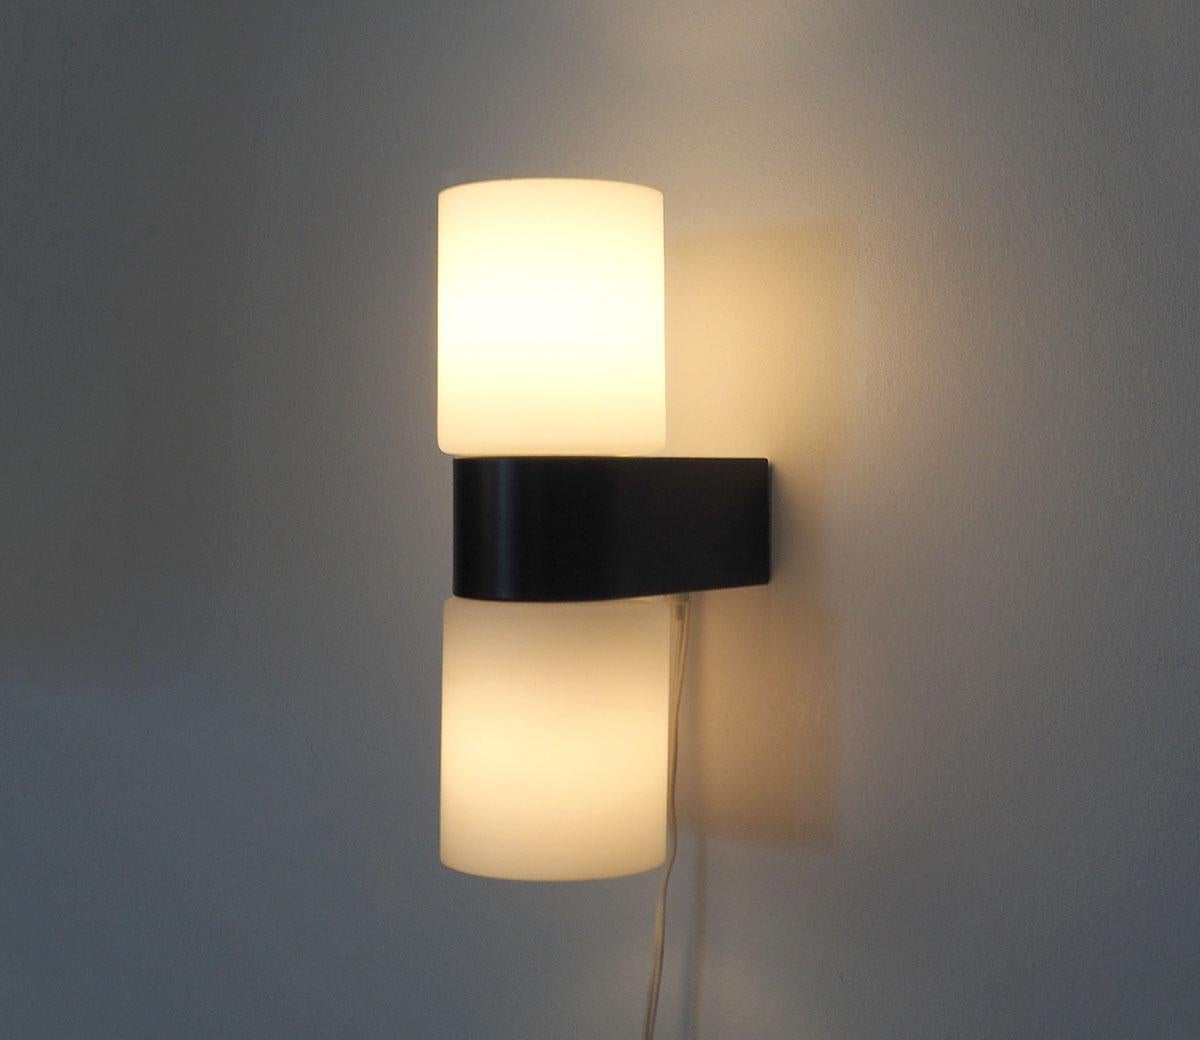 

About This Piece

Vintage Design
1960s wall lamp with 2 milk glass shades by Raak Amsterdam.

The caps are attached to a black and white lacquered metal holder with an on-off switch.

Beautiful sleek design and fits in a modern, classic or vintage